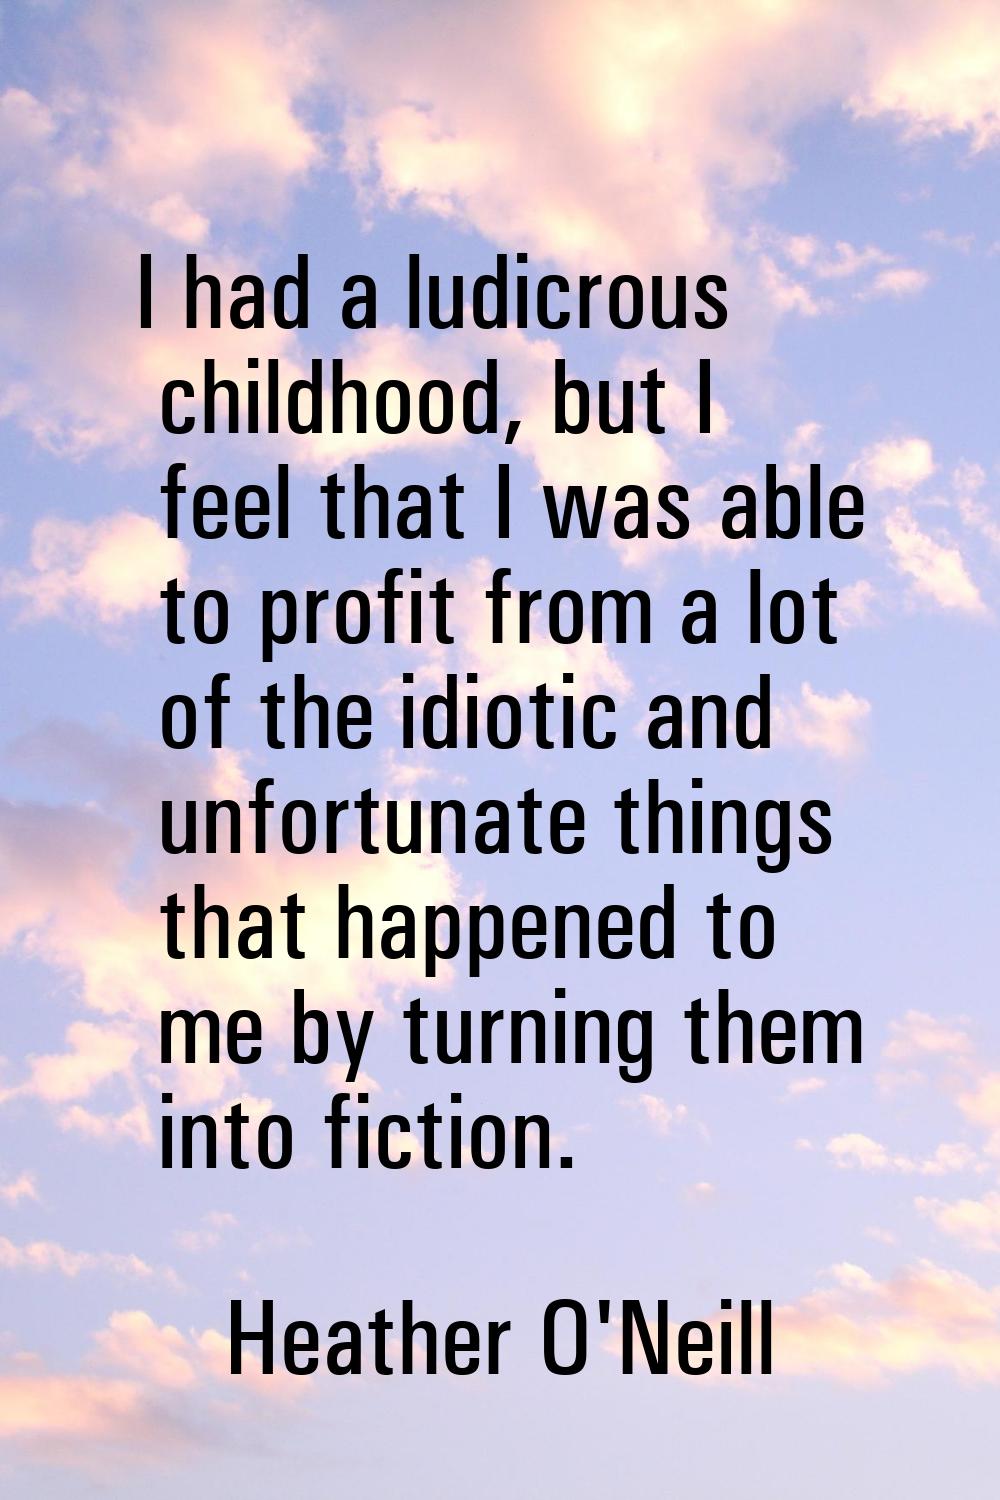 I had a ludicrous childhood, but I feel that I was able to profit from a lot of the idiotic and unf